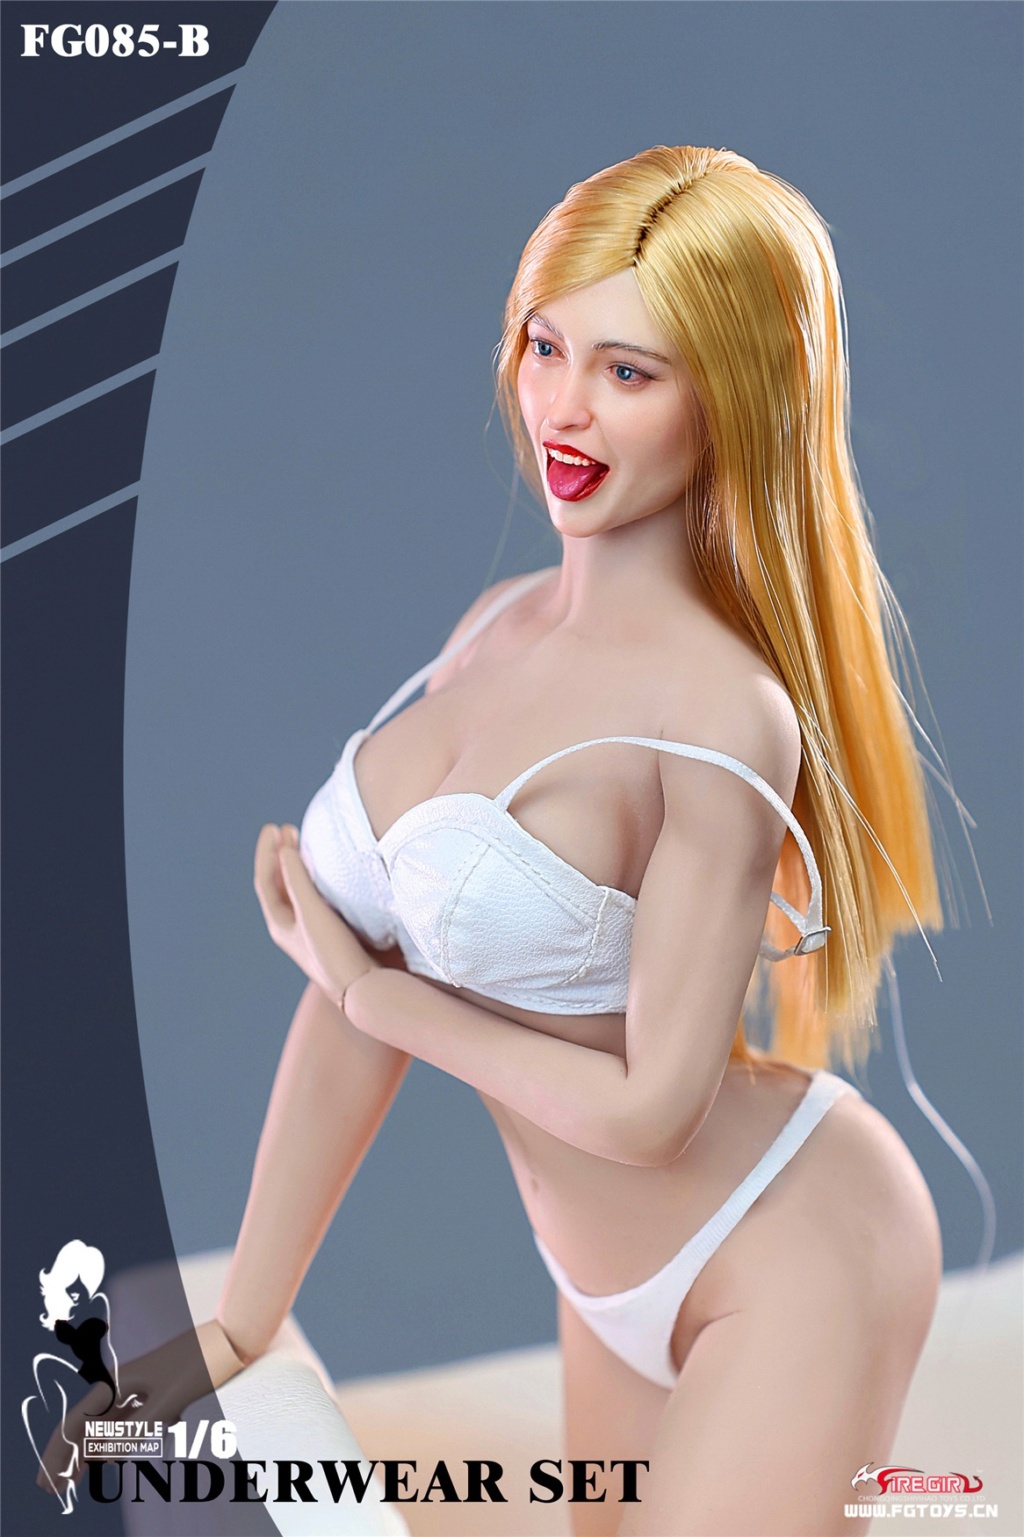 Clothing - NEW PRODUCT: Fire Girl Toys: 1/6 FG085 Wardrobe Collection Female Underwear Set (Three Colors) NSFW 0cc1c510